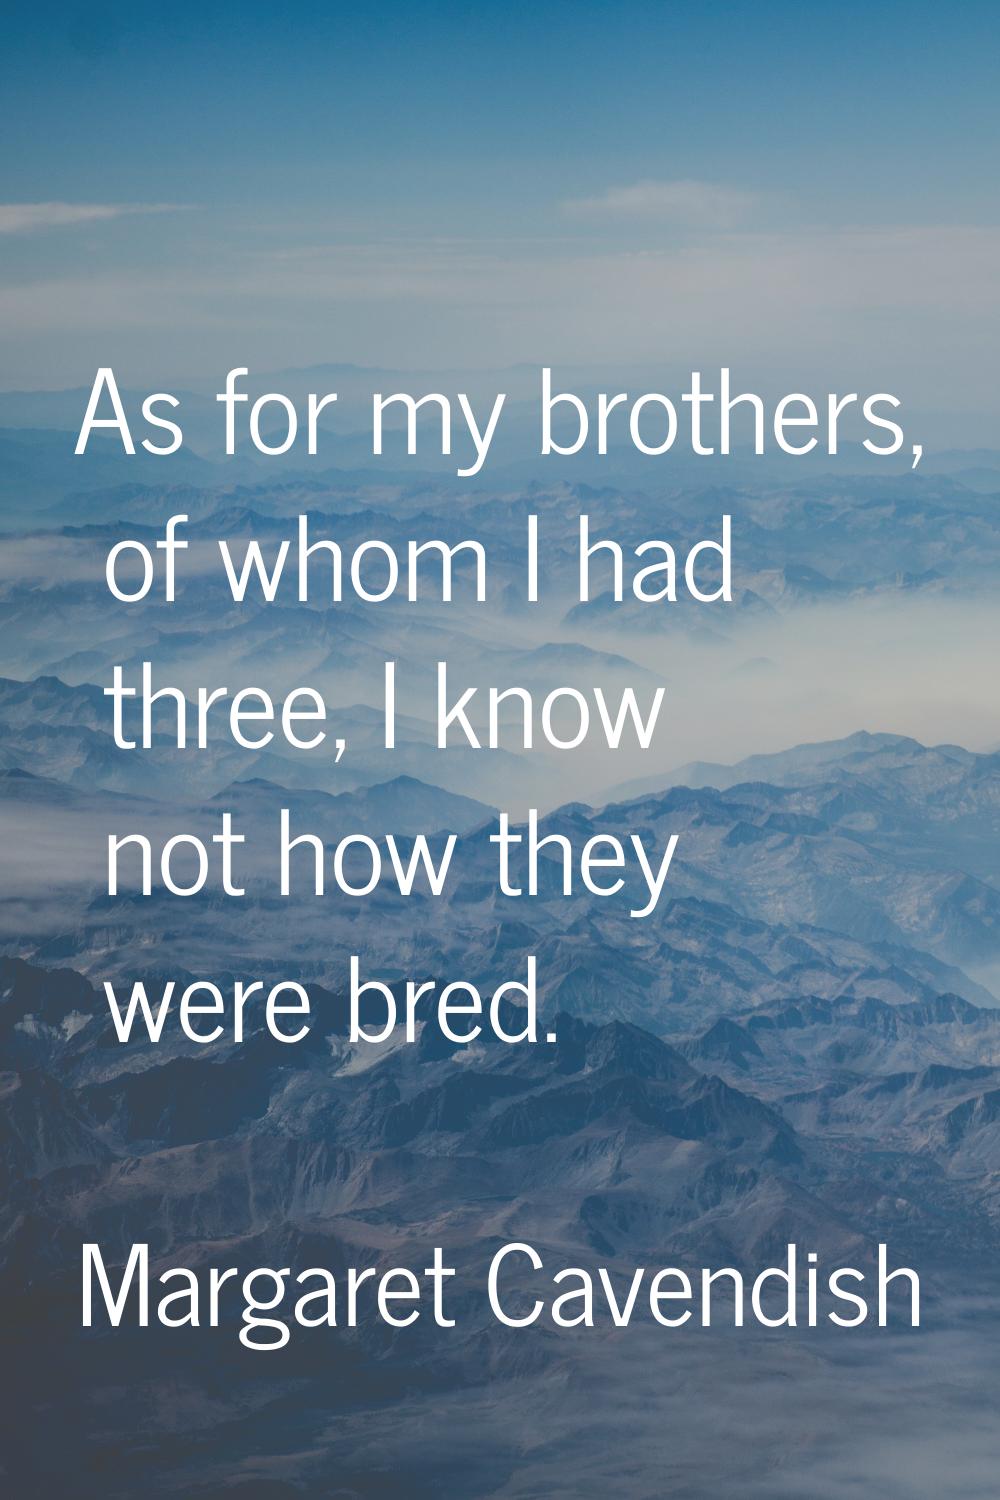 As for my brothers, of whom I had three, I know not how they were bred.